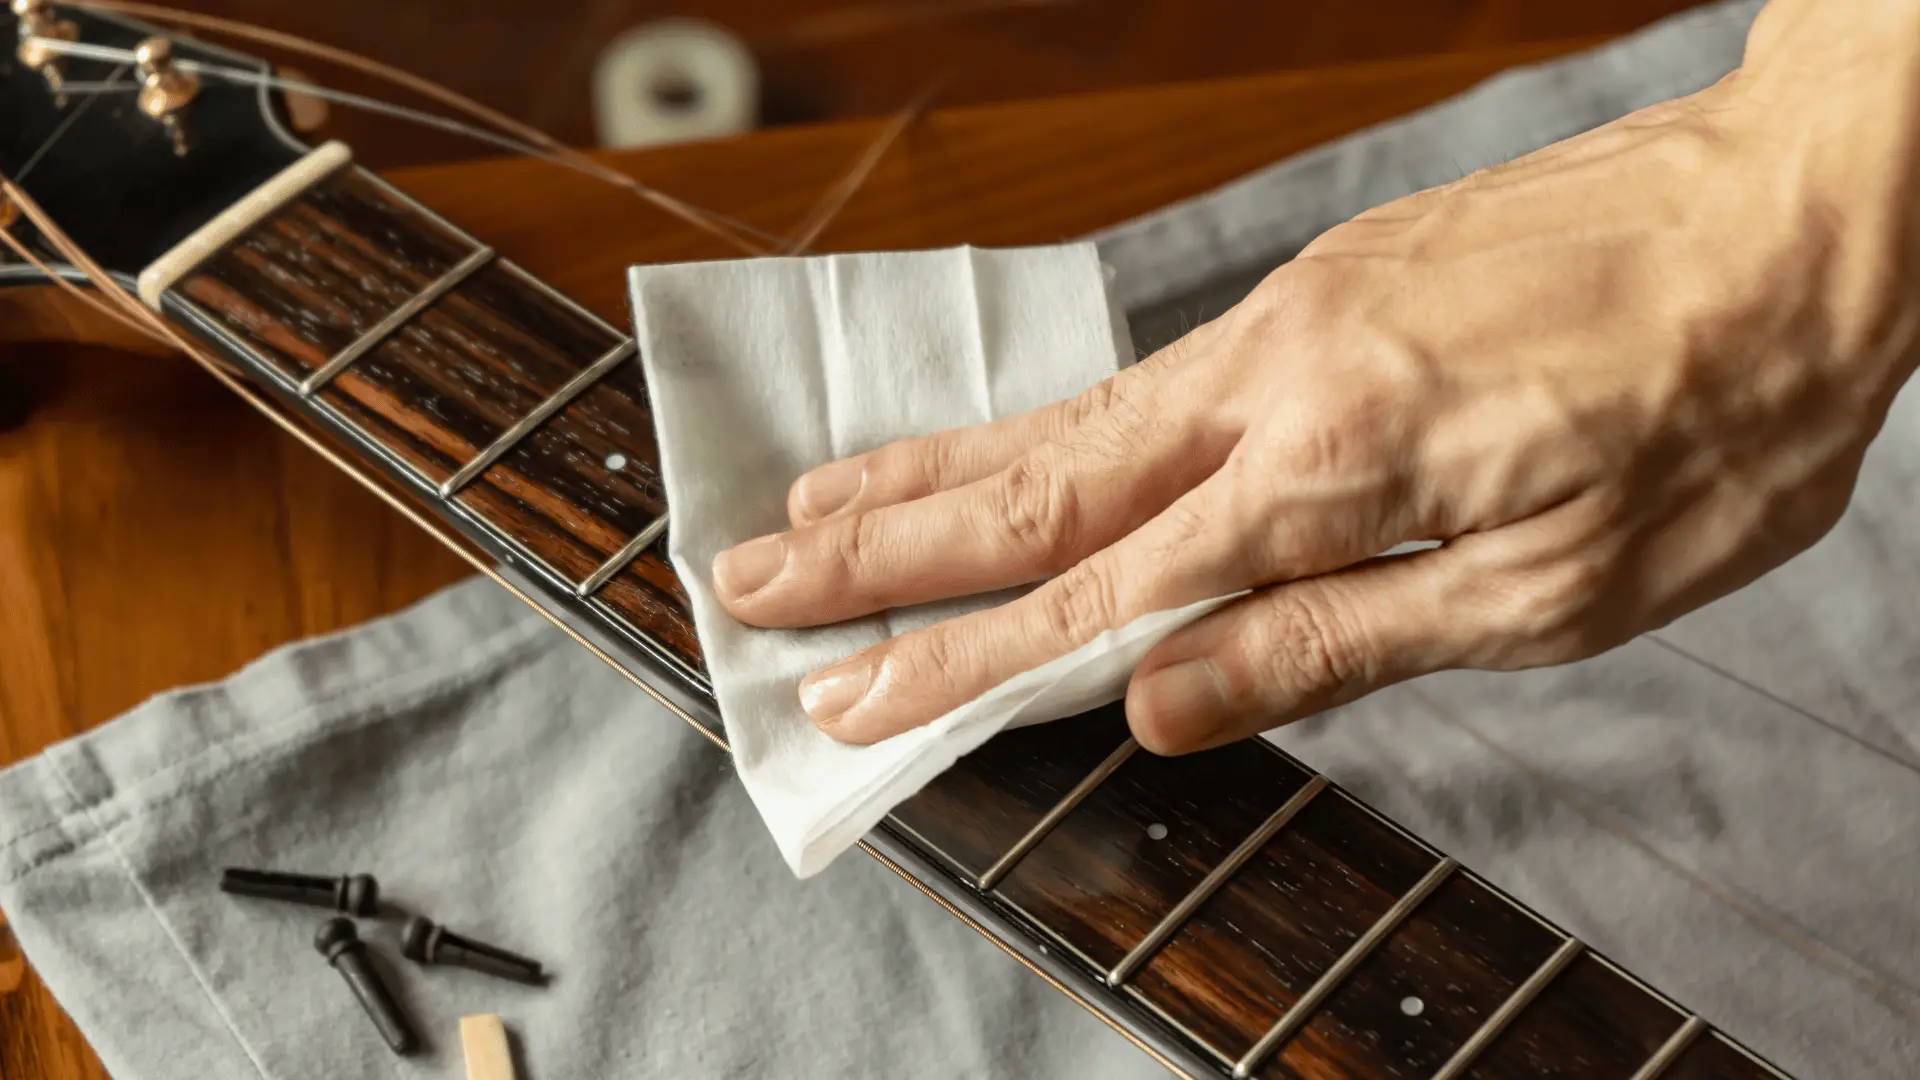 Cleaning Guitar